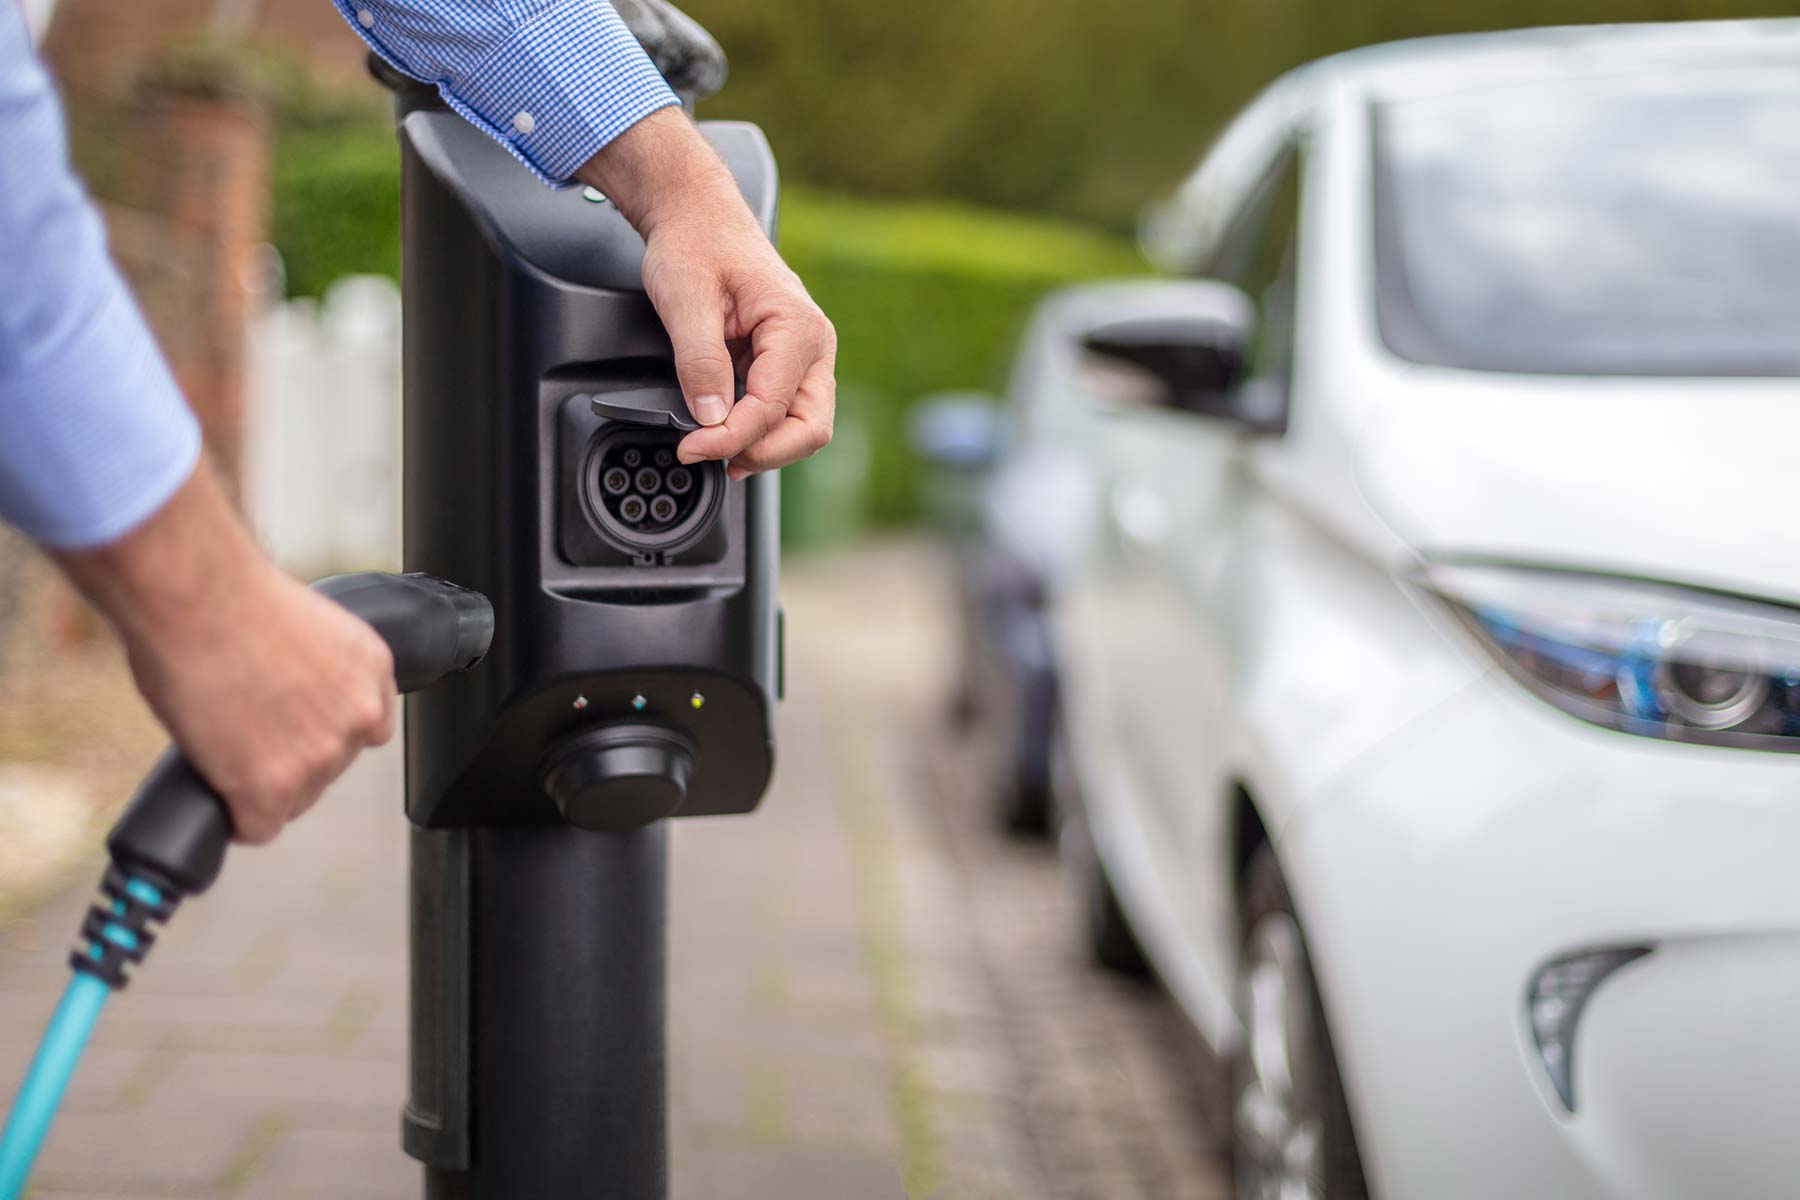 London’s first public lamppost electric vehicle charging points are